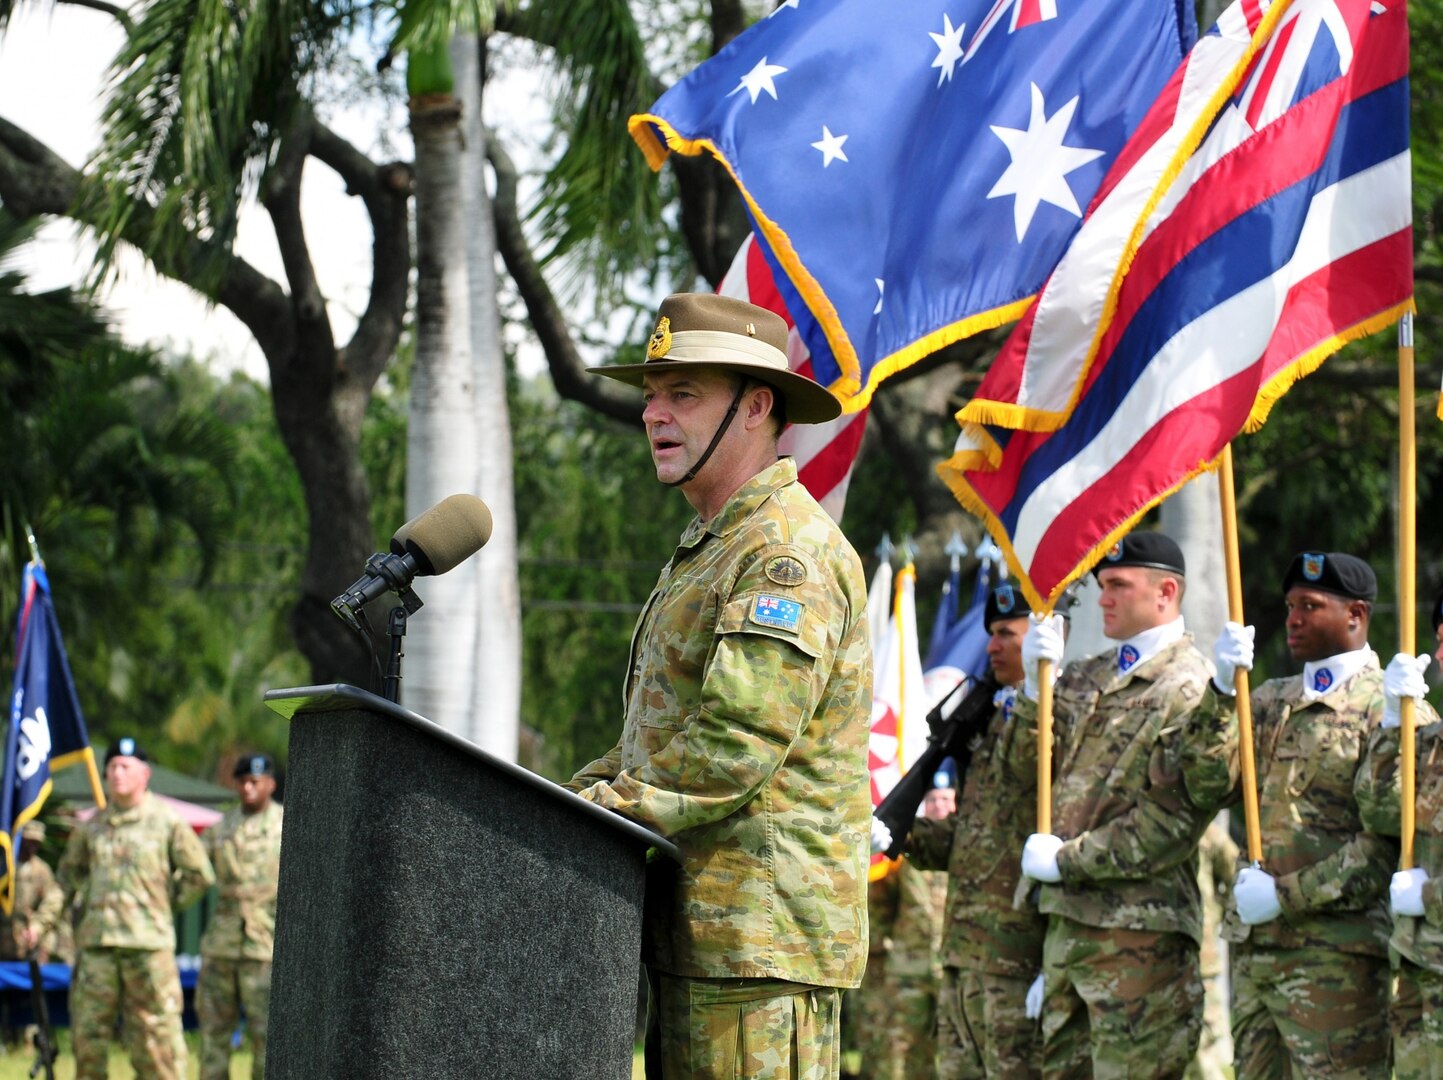 Australian Army Maj. Gen. Gregory C. Bilton, outgoing Deputy Commanding General-North, U.S. Army Pacific, delivers his speech during at a Flying "V" ceremony held at historic Palm Circle, Fort Shafter, Mar. 14, 2016.  The Flying "V" ceremony was held to honor Bilton for his distinguished service as Deputy Commanding General-North, U.S. Army Pacific, as he prepares to depart USARPAC; and to welcome Brig. Gen. Doug Anderson (not pictured), incoming Deputy Commanding General-Army Reserve. The "V" refers to the way the colors are posted during the ceremony, which is V-shaped. 